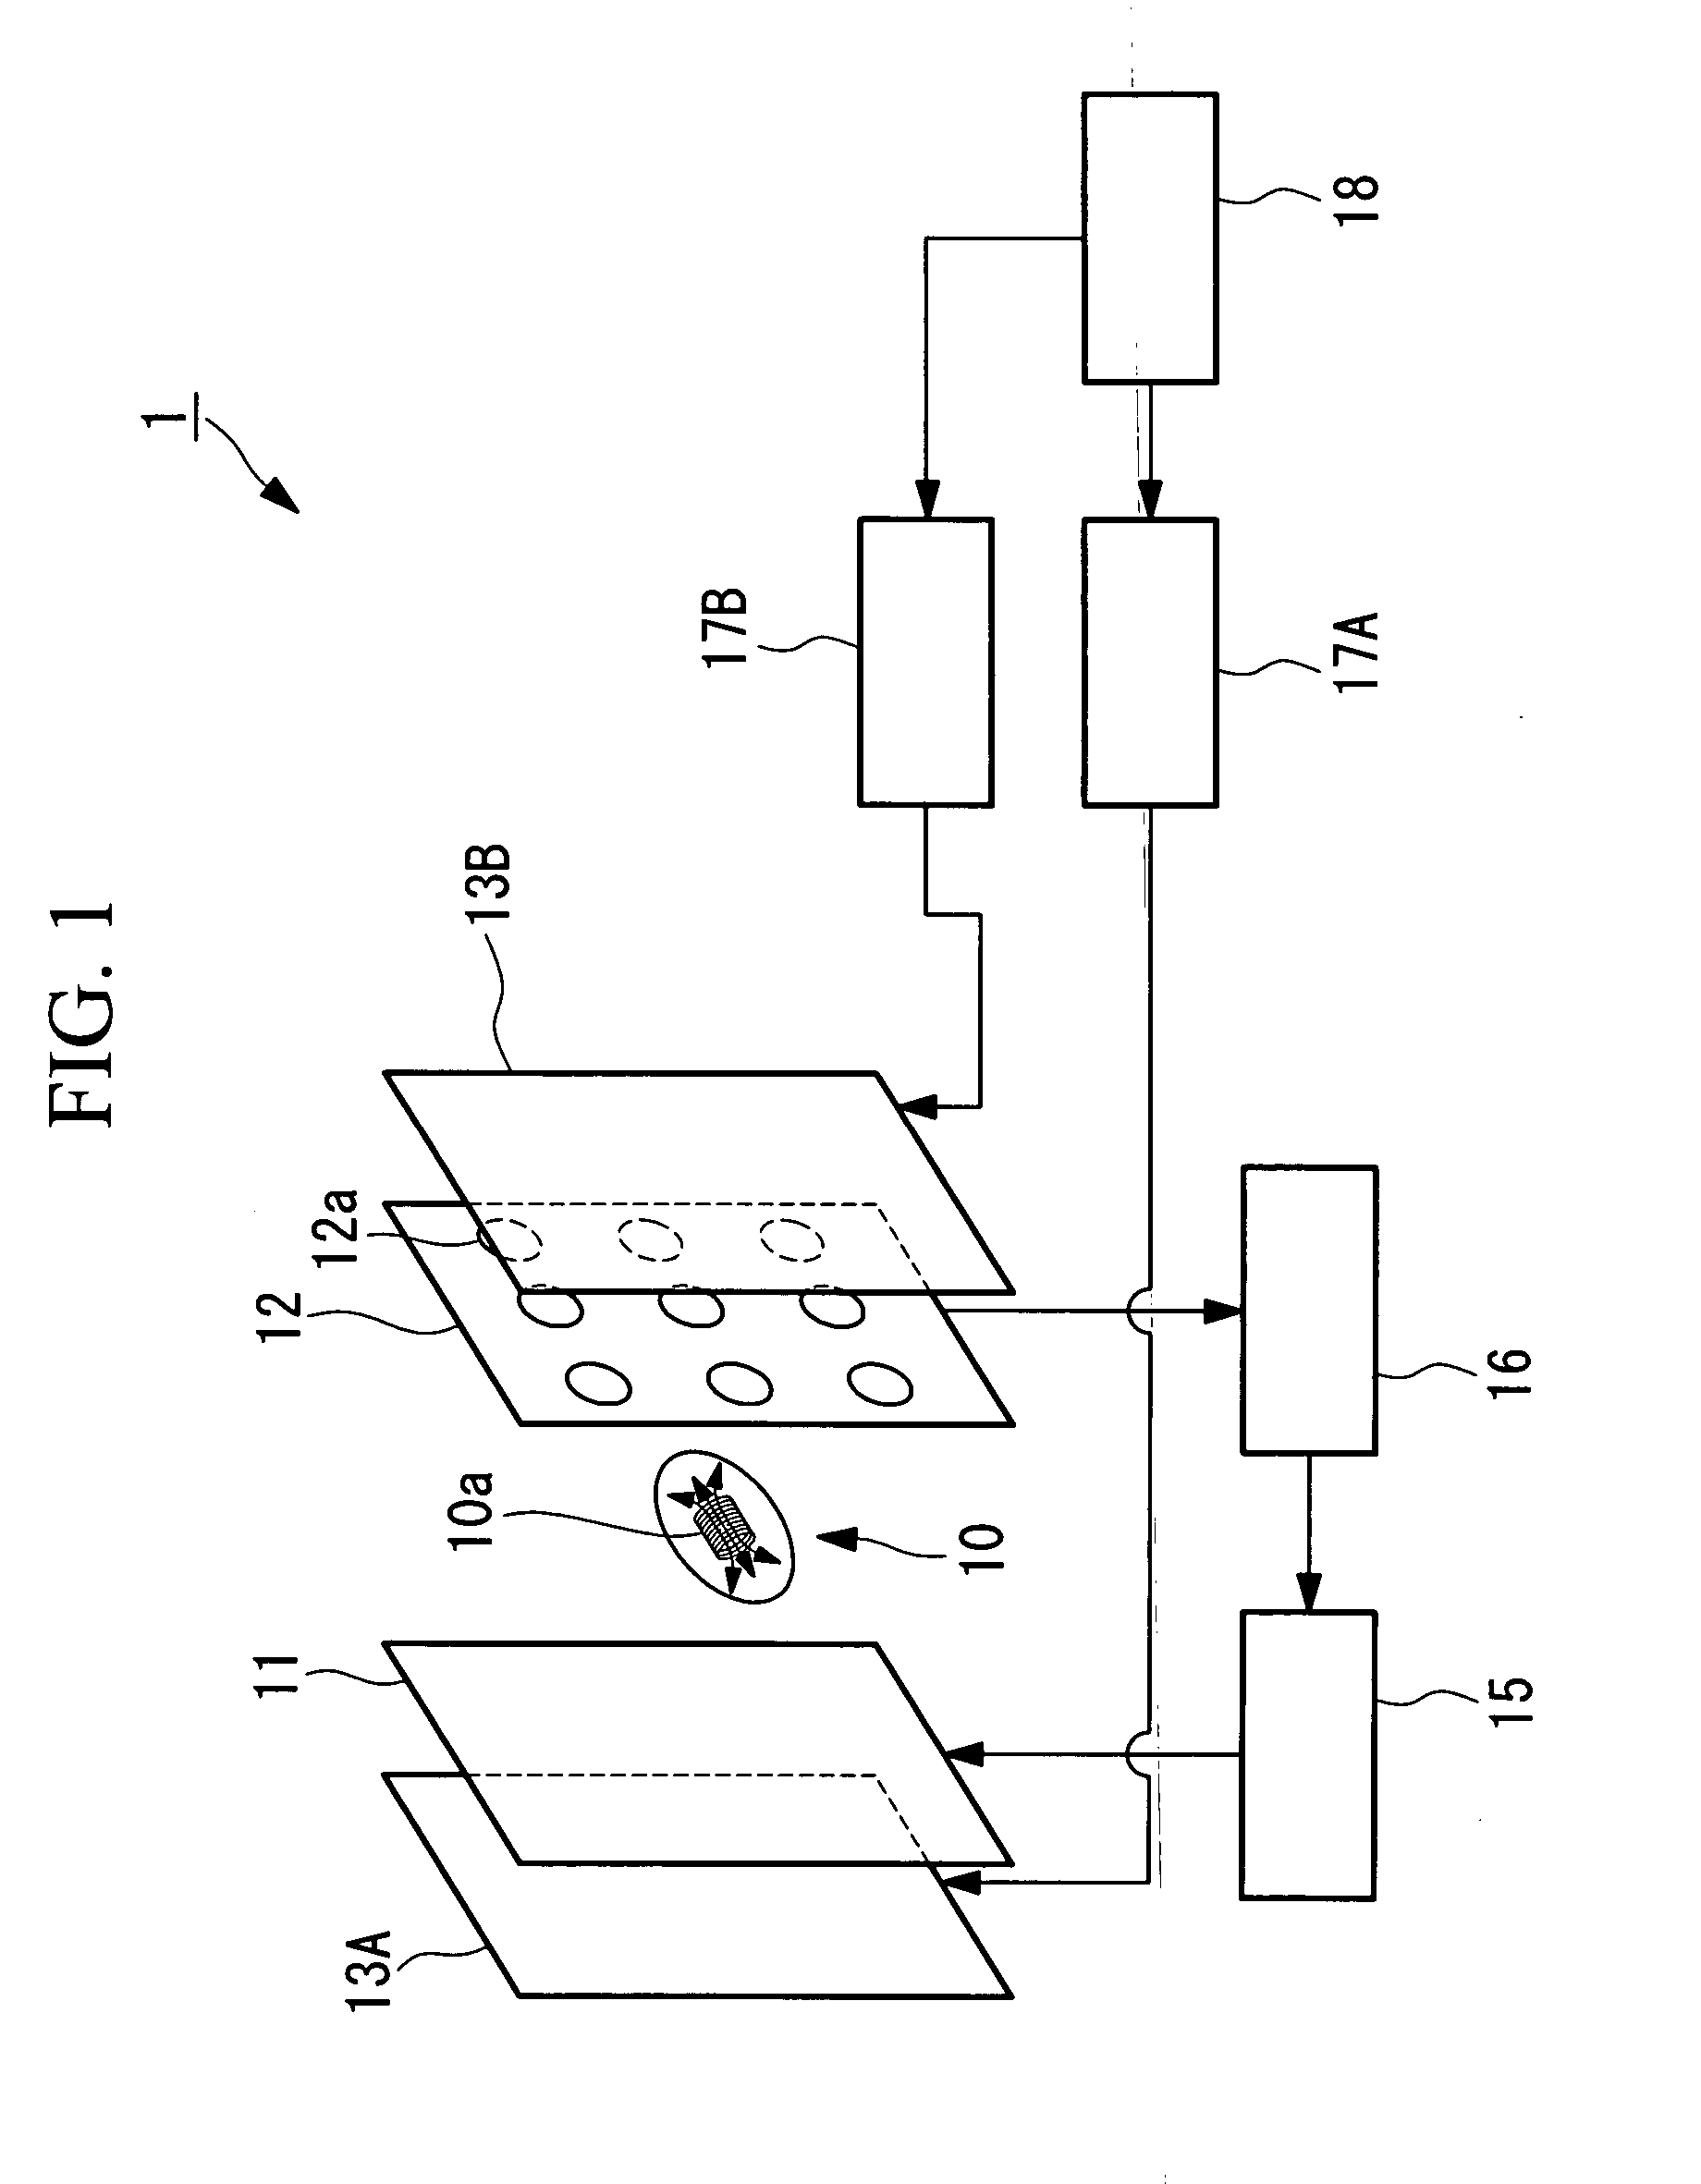 Medical device magnetic guidance/position detection system